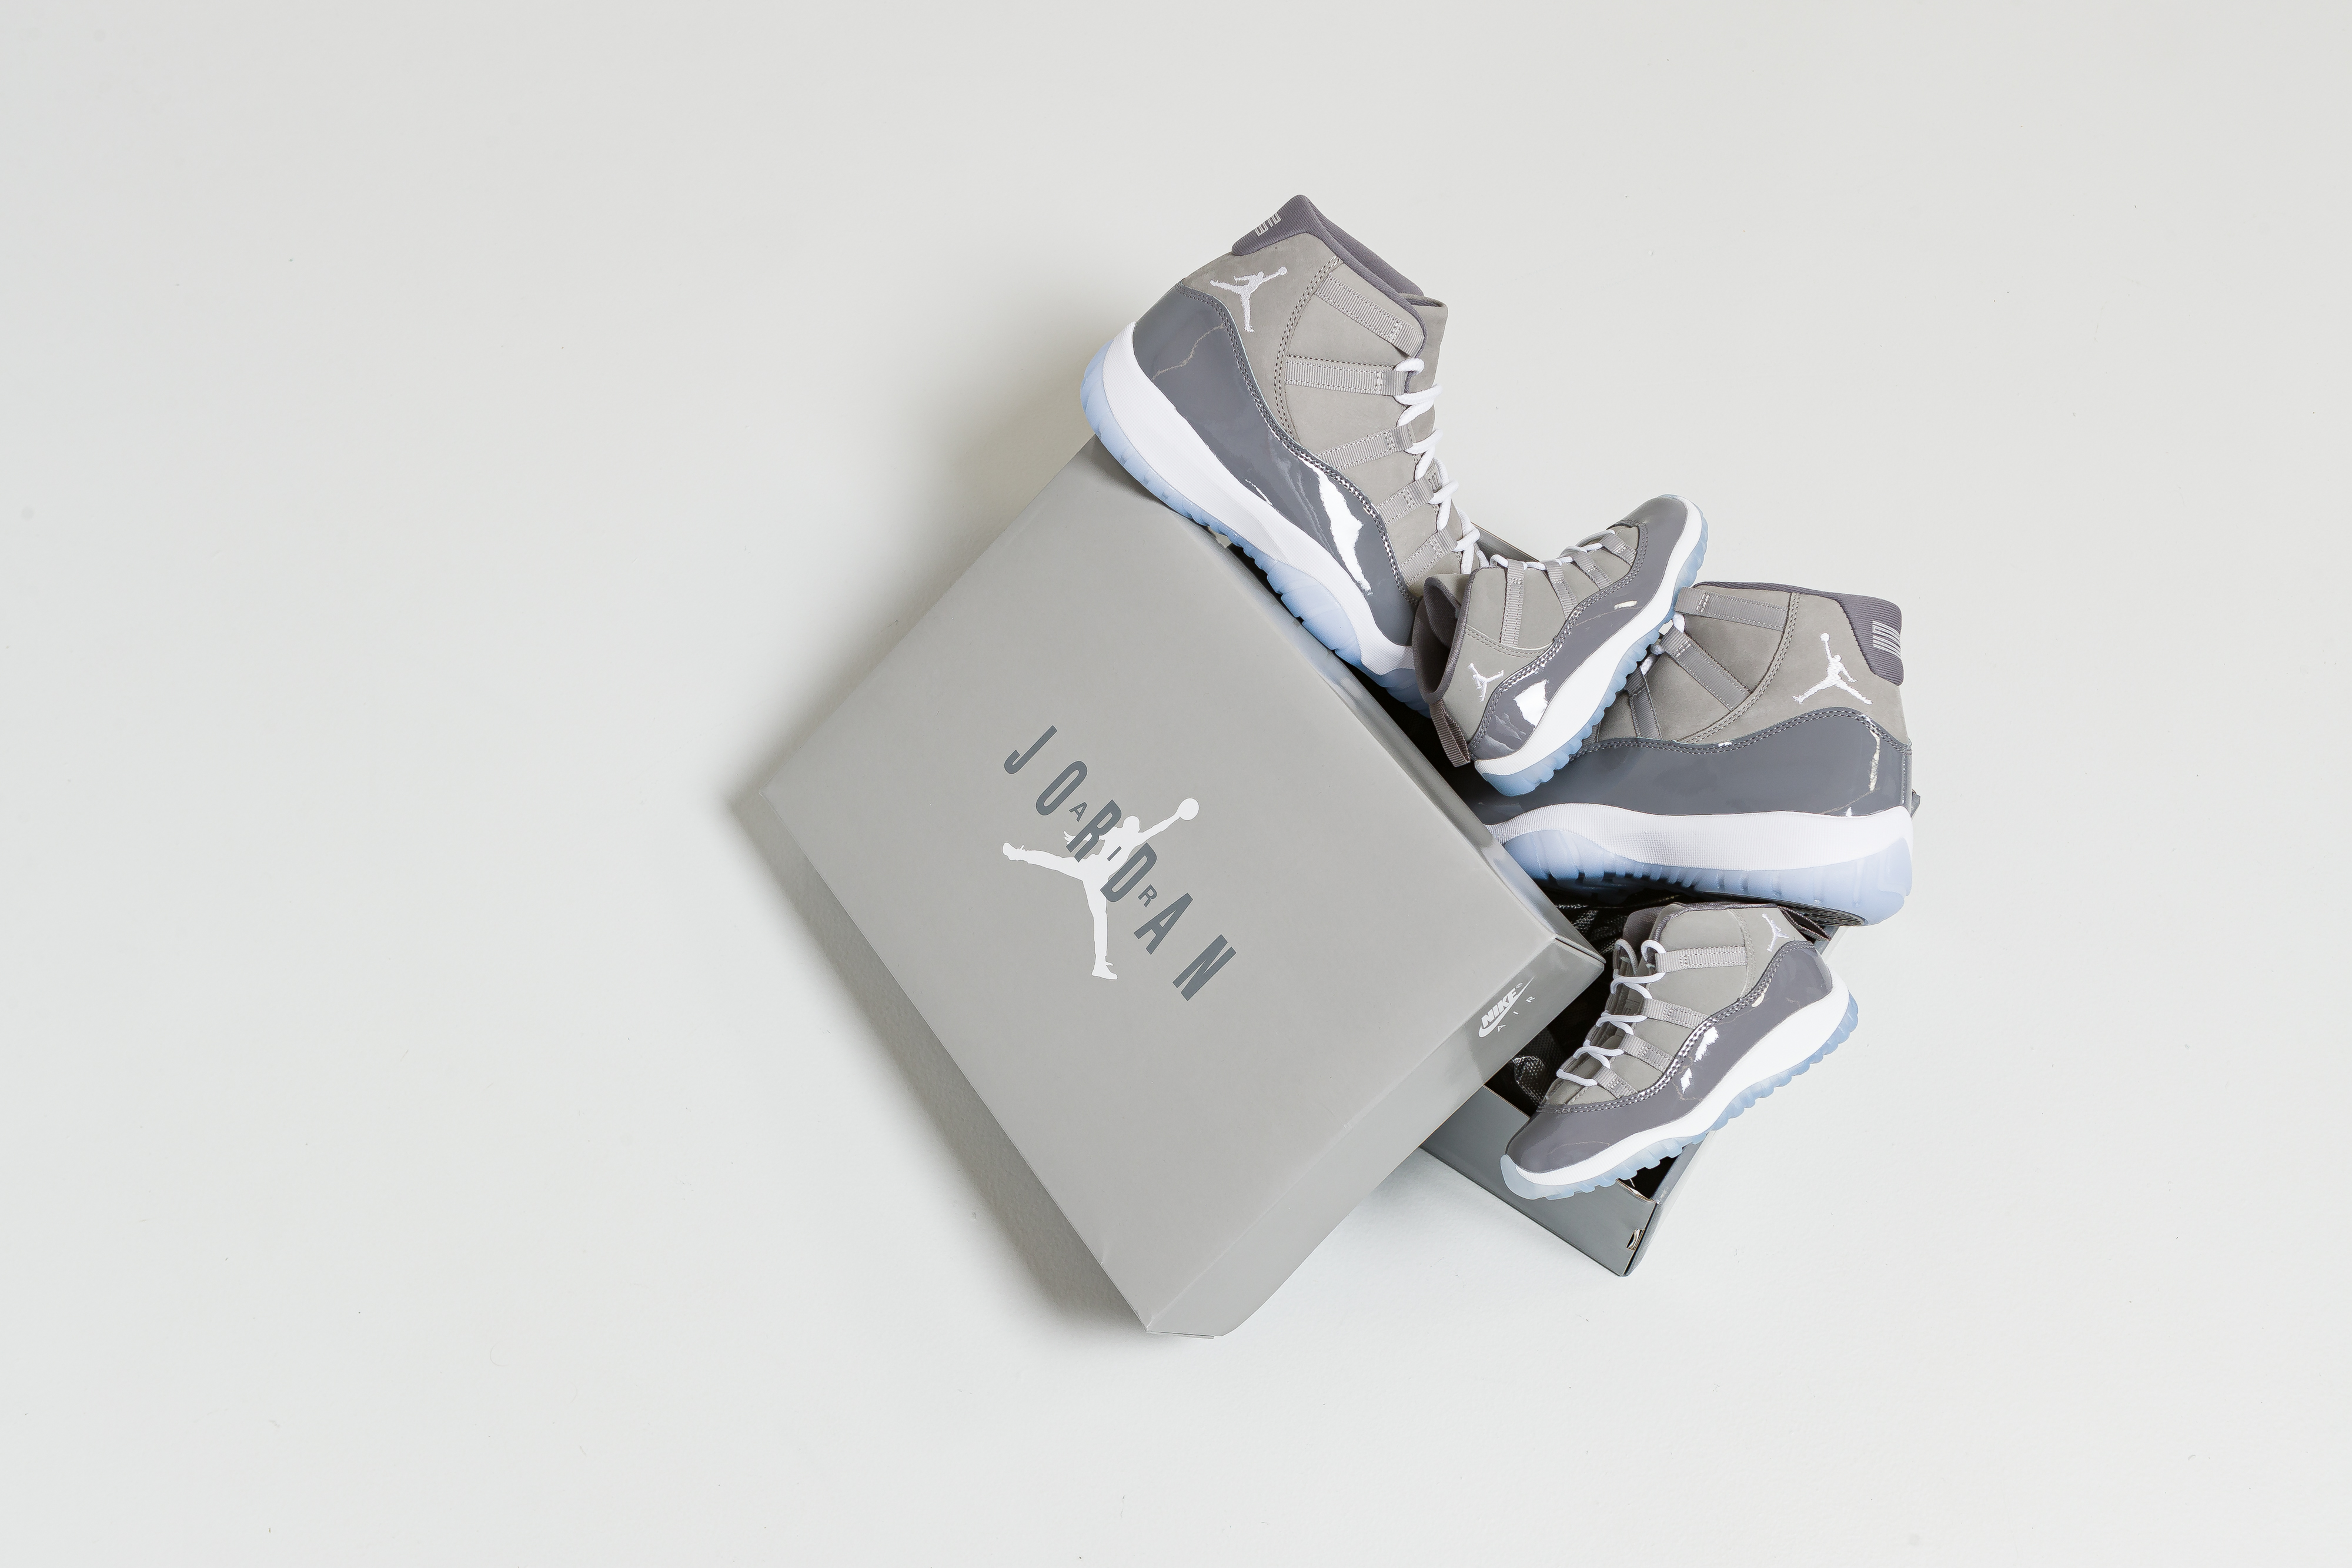 Up There Launches - Nike Air Jordan 11 Retro 'Cool Grey'